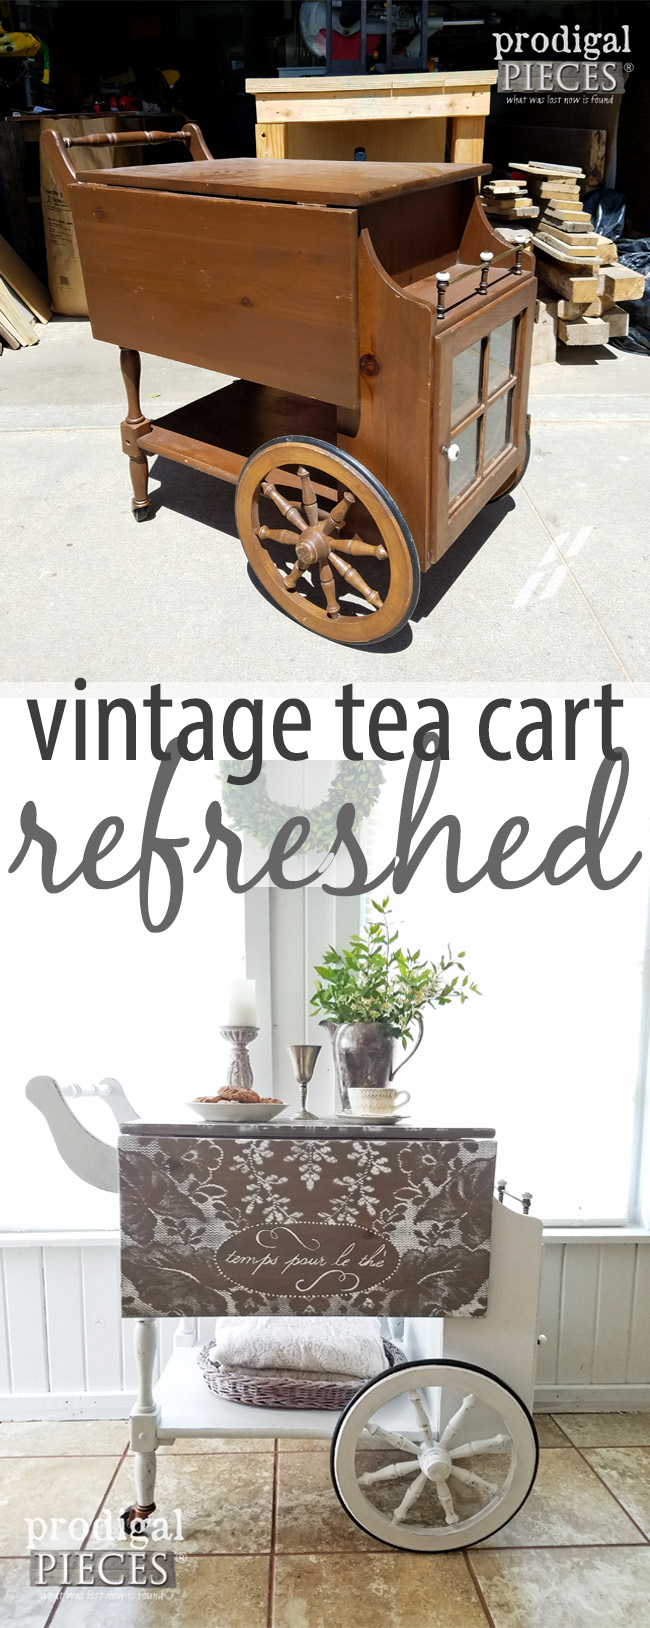 A vintage tea cart gets a refreshed new look with lace painting and some ooh, la, la. See the makeover by Prodigal Pieces at prodigalpieces.com